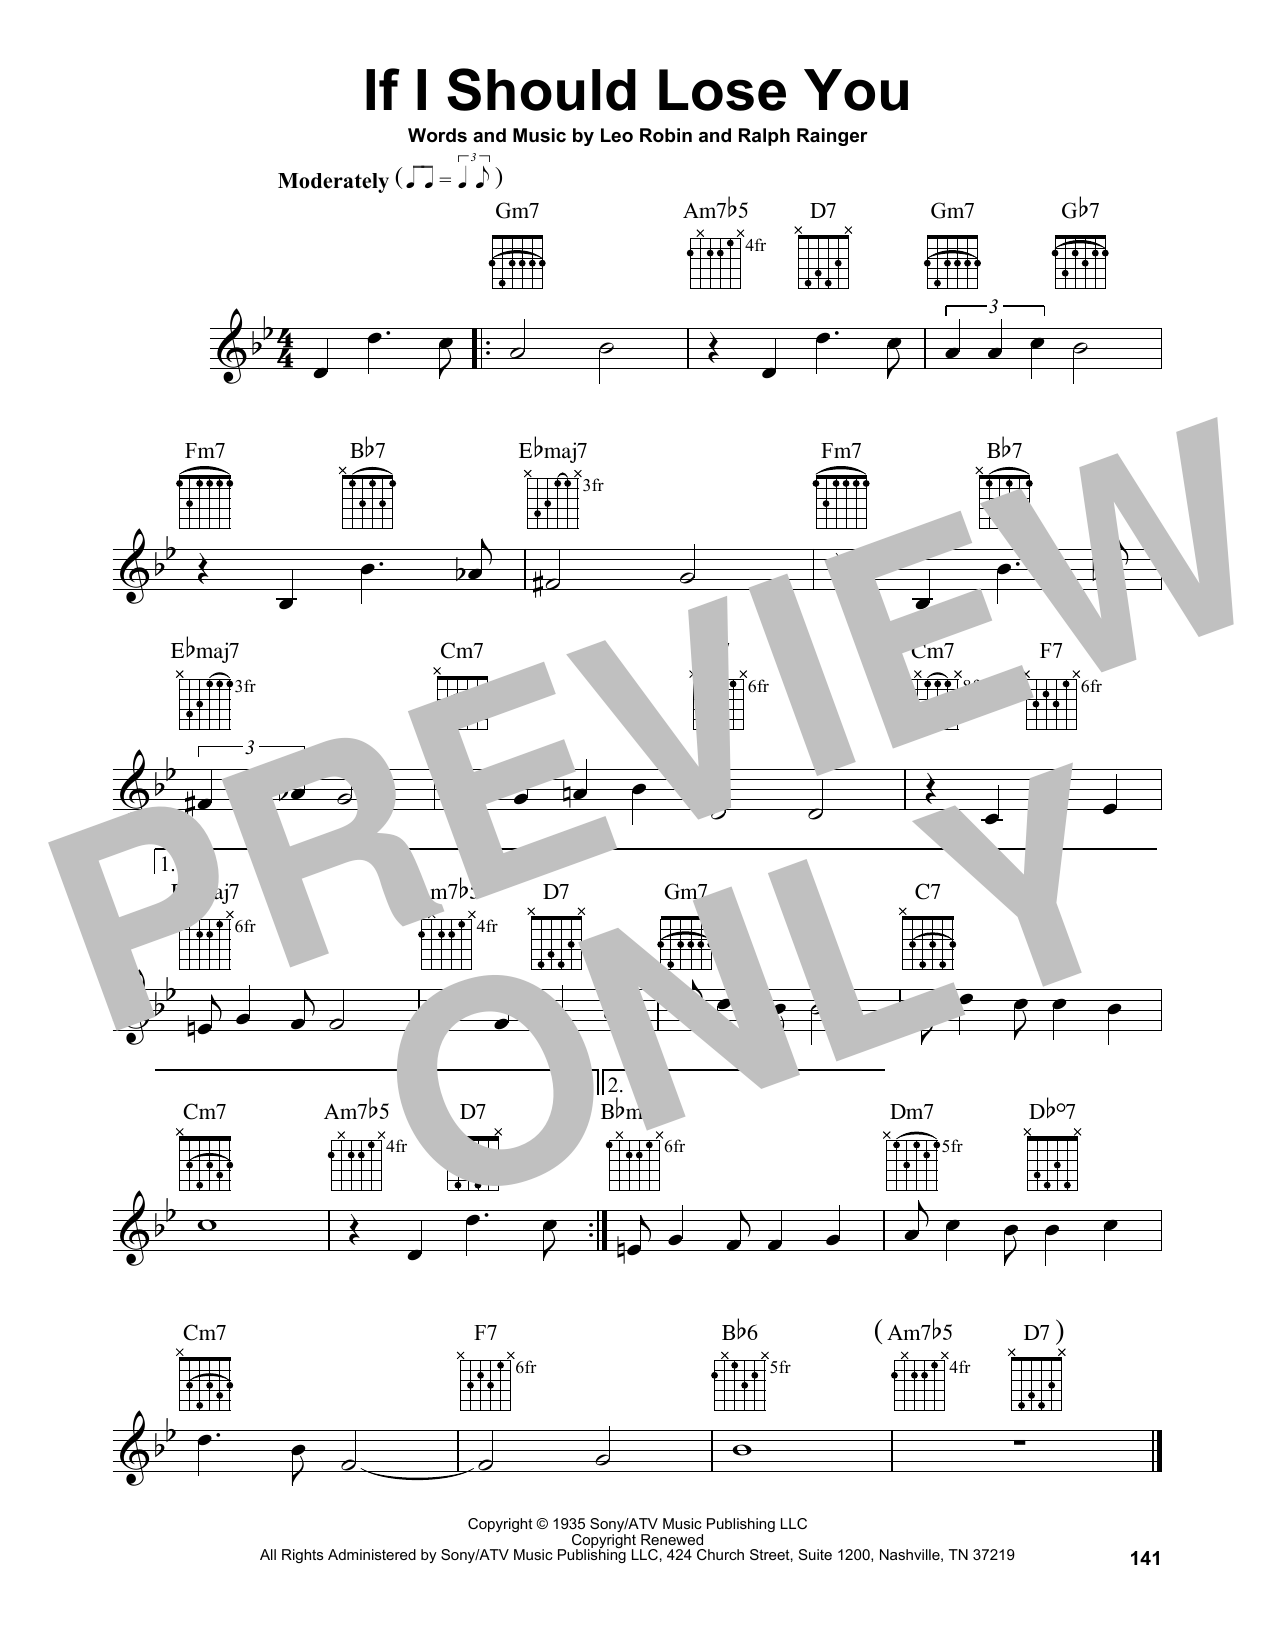 Download Phineas Newborn If I Should Lose You Sheet Music